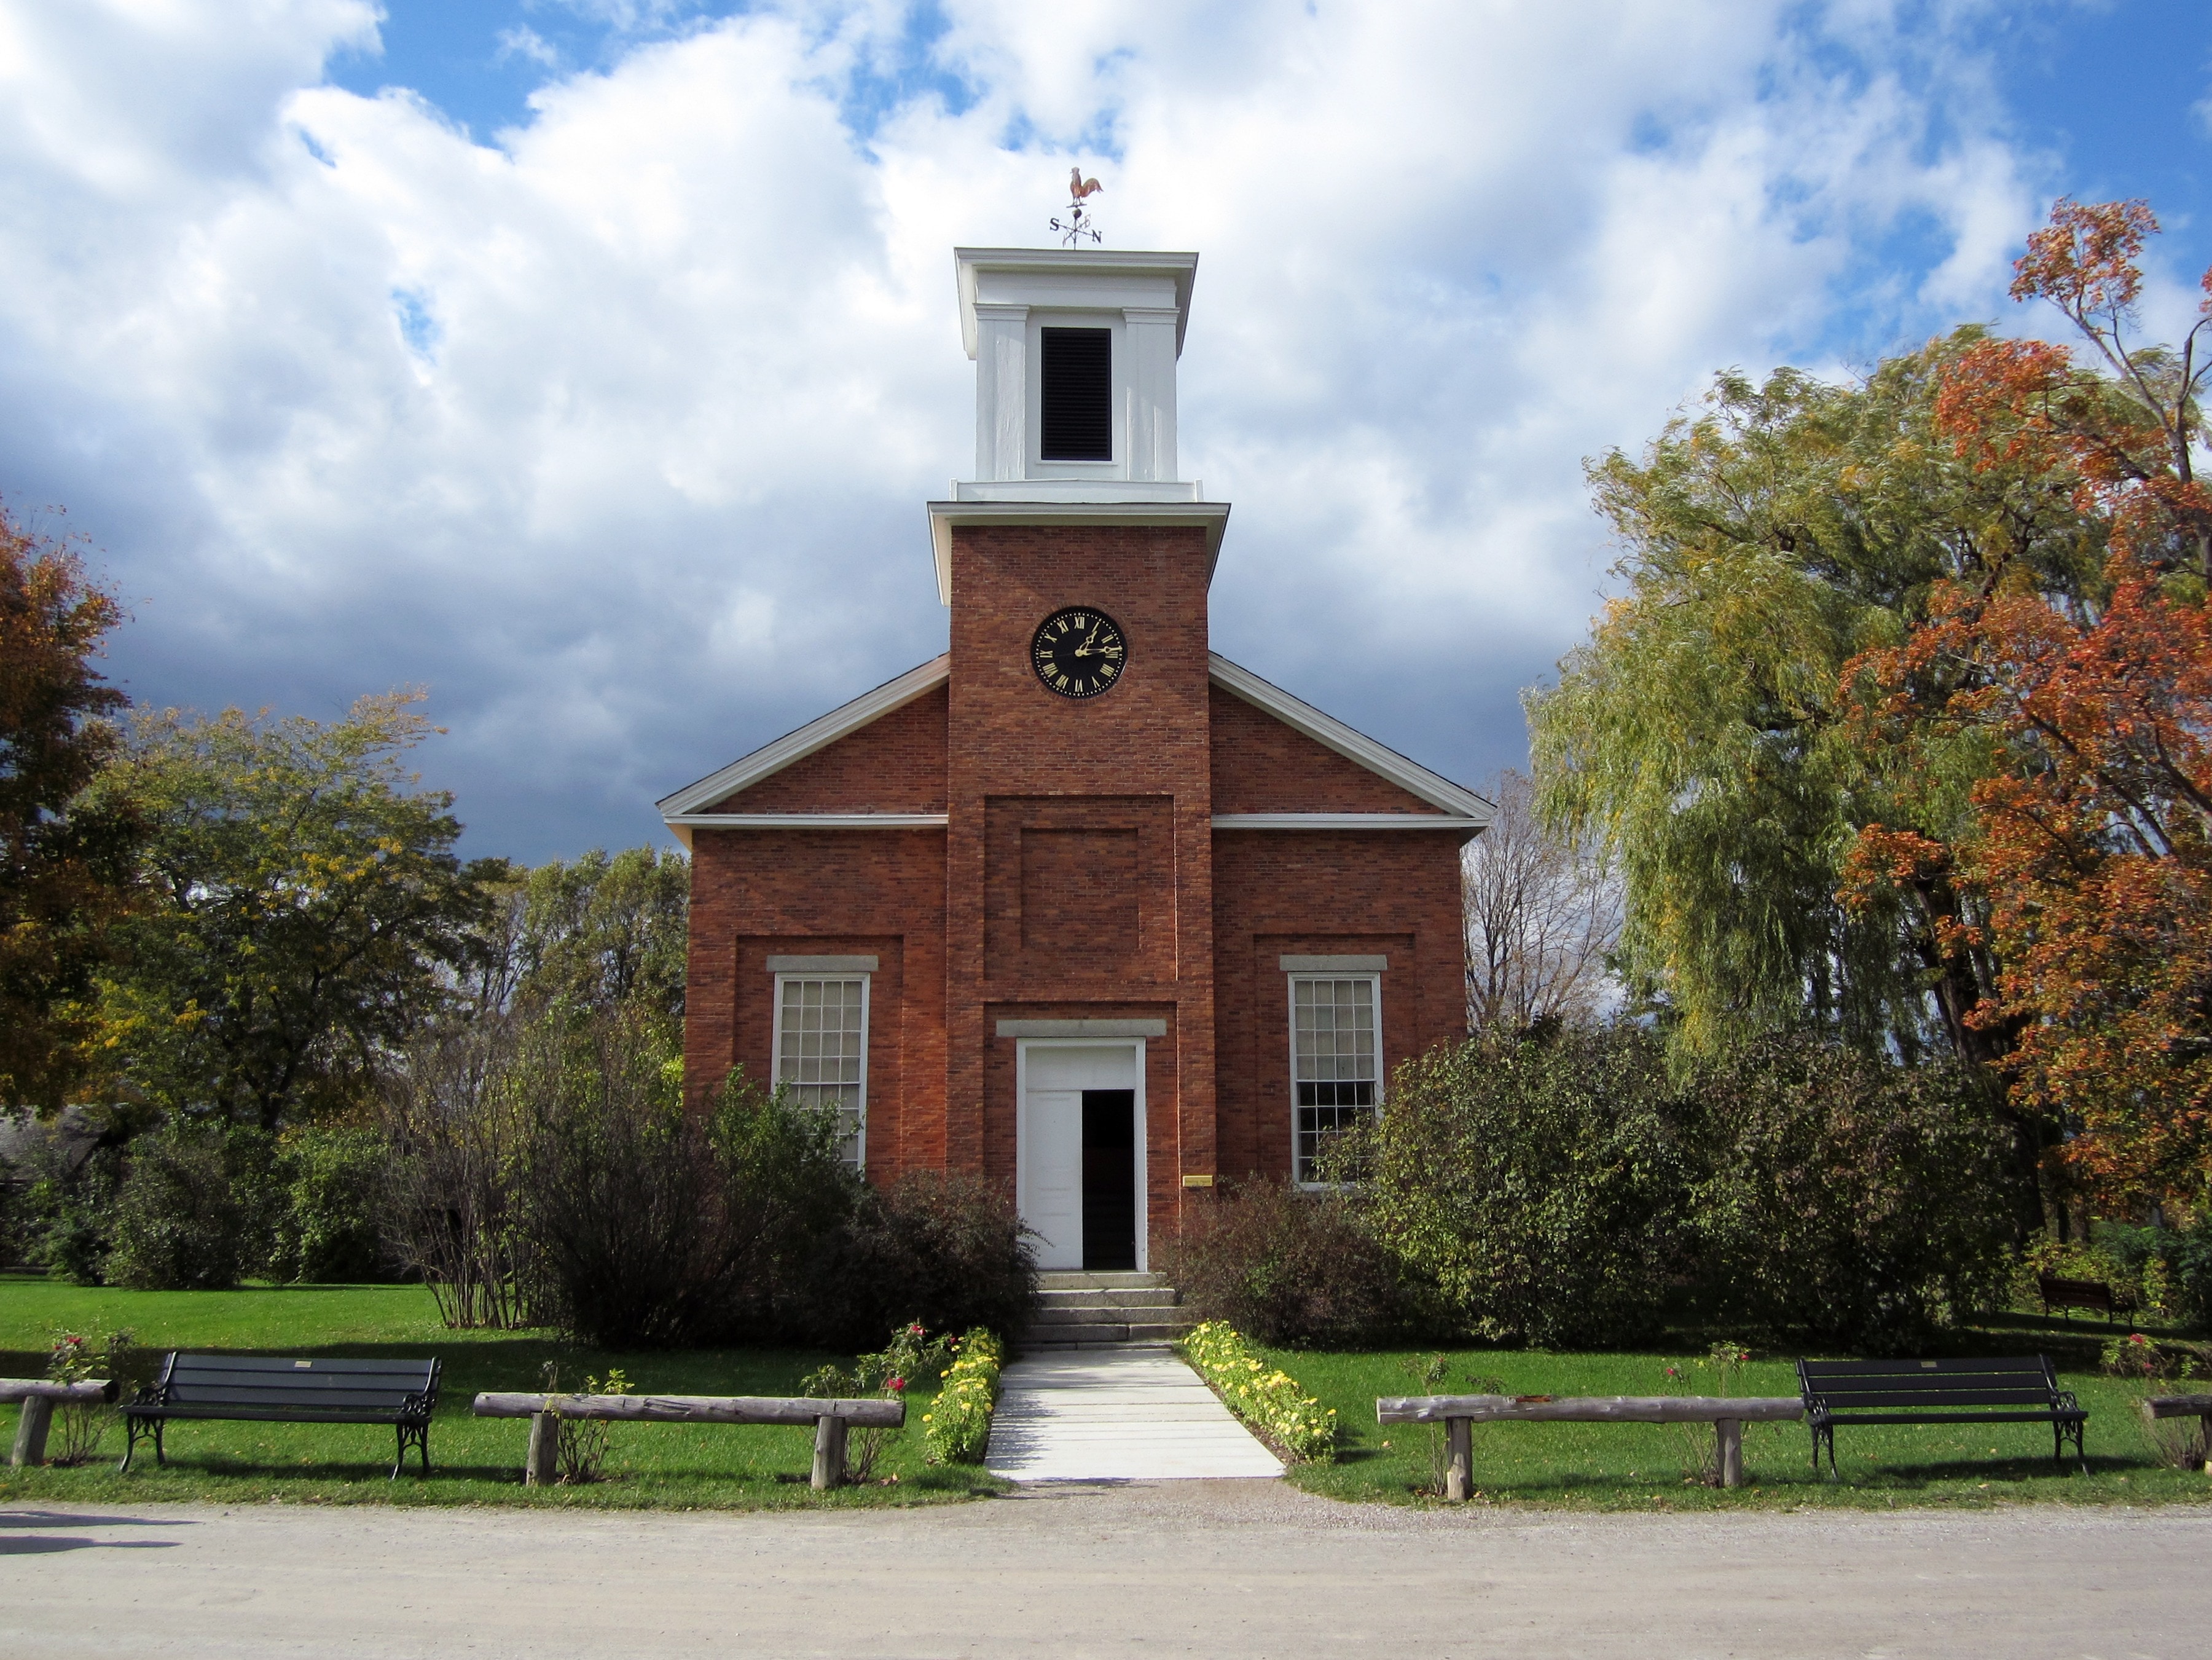 red brick church with bell tower and clock tower